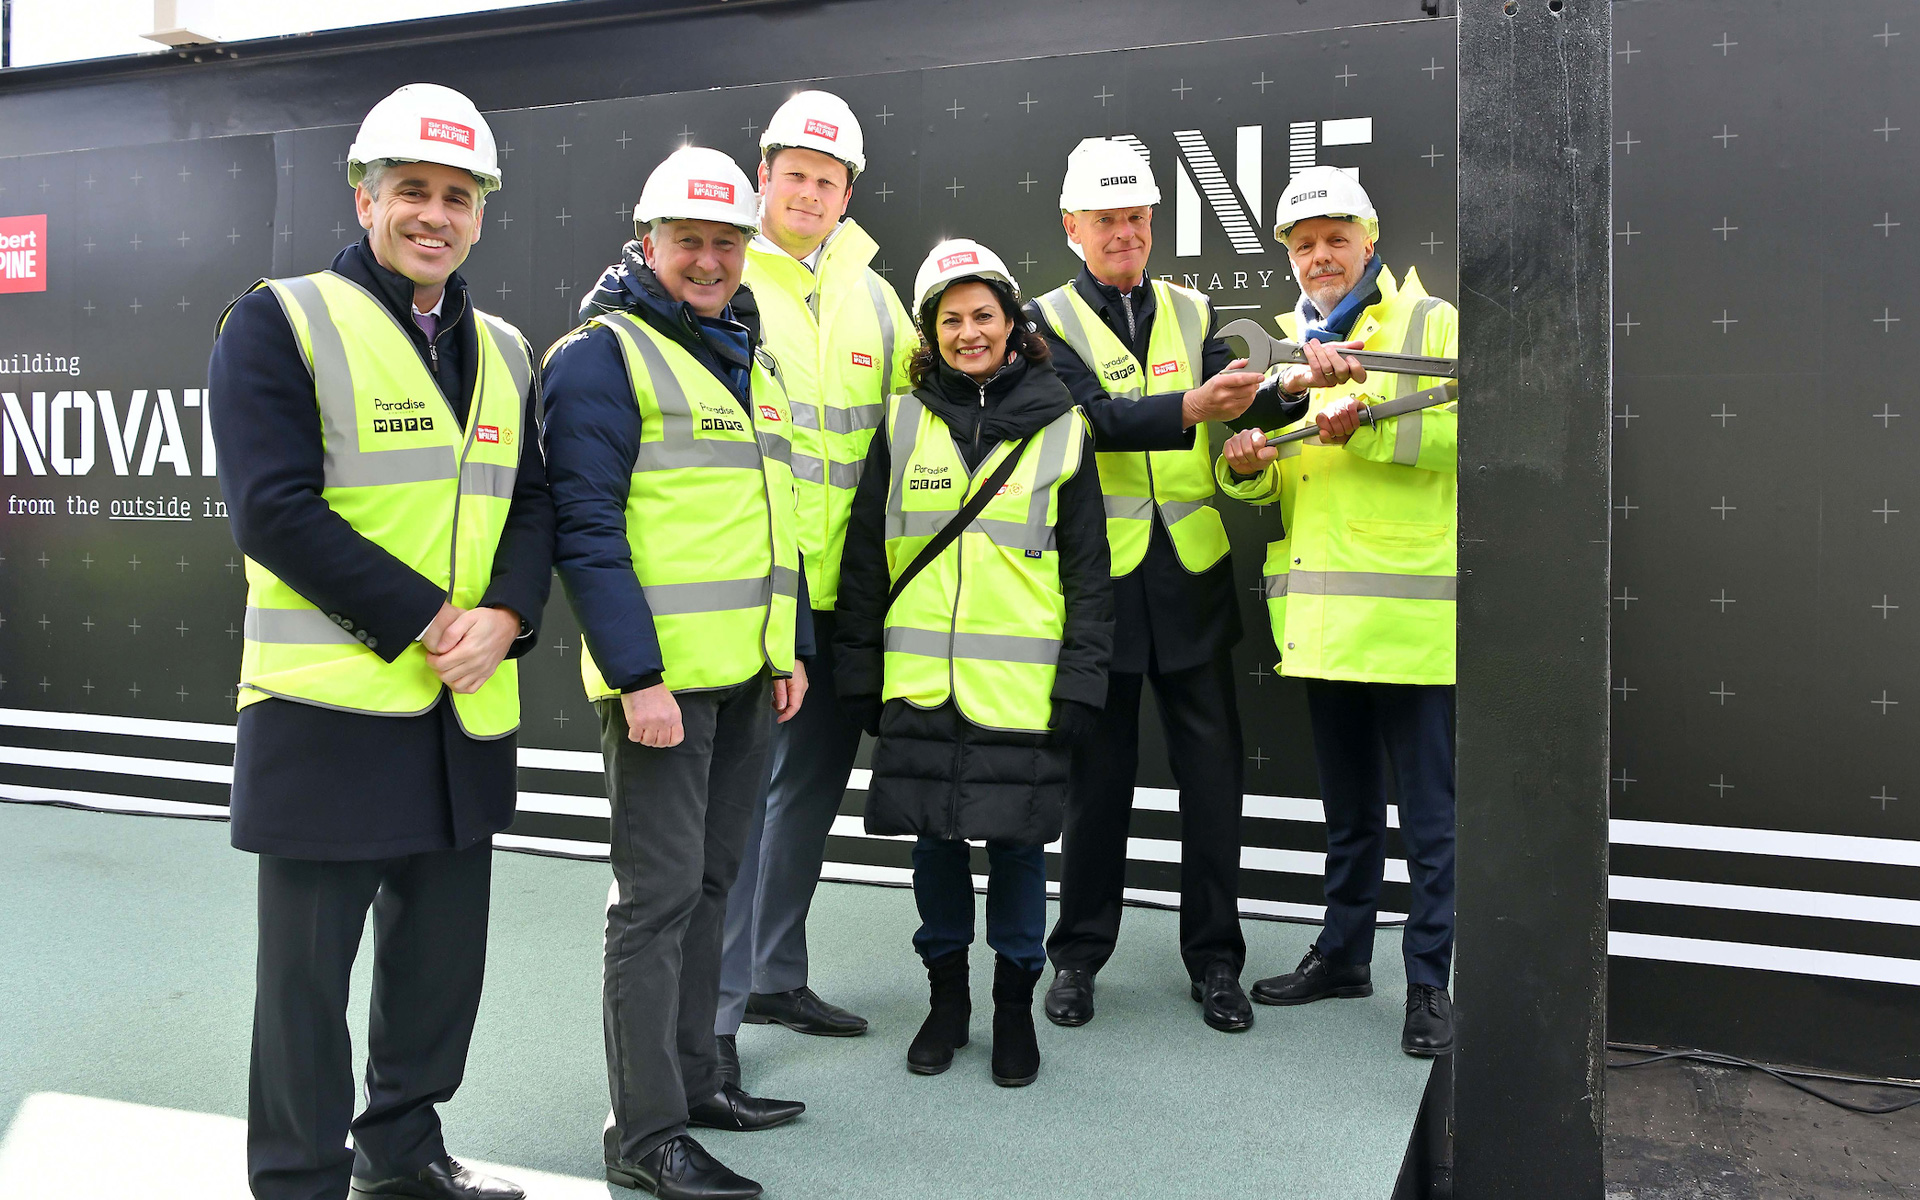 (L-R of group): Hector McAlpine of Sir Robert McAlpine, Ian Ward, Leader of Birmingham City Council, Stuart Bale of Sir Robert McAlpine, Anita Bhalla of Greater Birmingham &amp; Solihull Local Enterprise Partnership, Chris Taylor of Federated Hermes and Rob Groves of MEPC.